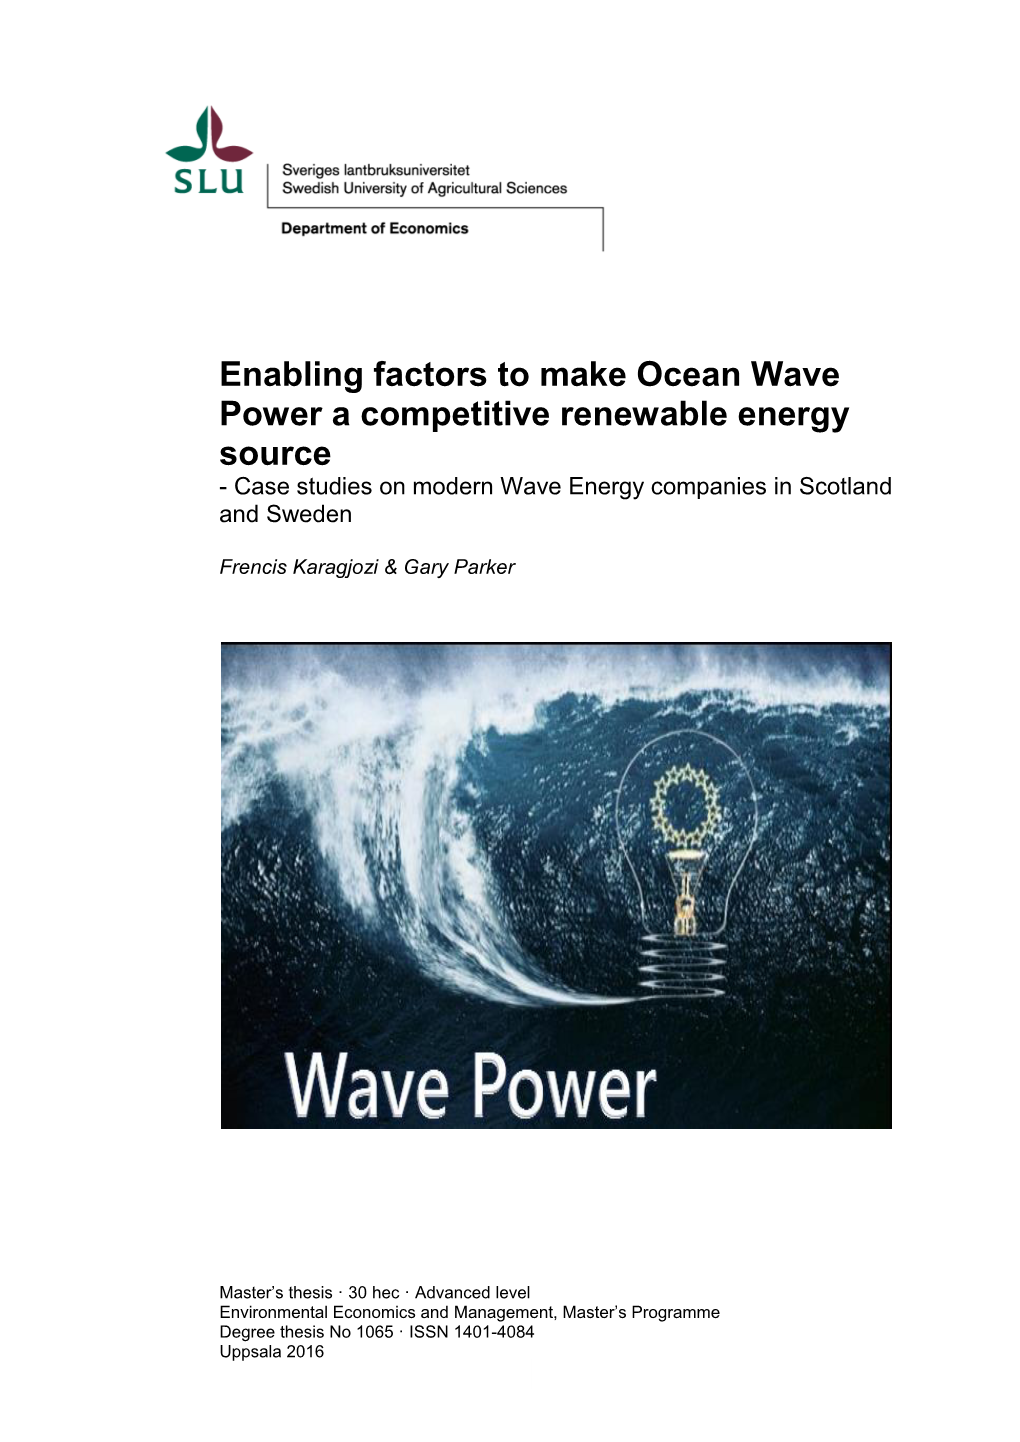 Enabling Factors to Make Ocean Wave Power a Competitive Renewable Energy Source - Case Studies on Modern Wave Energy Companies in Scotland and Sweden